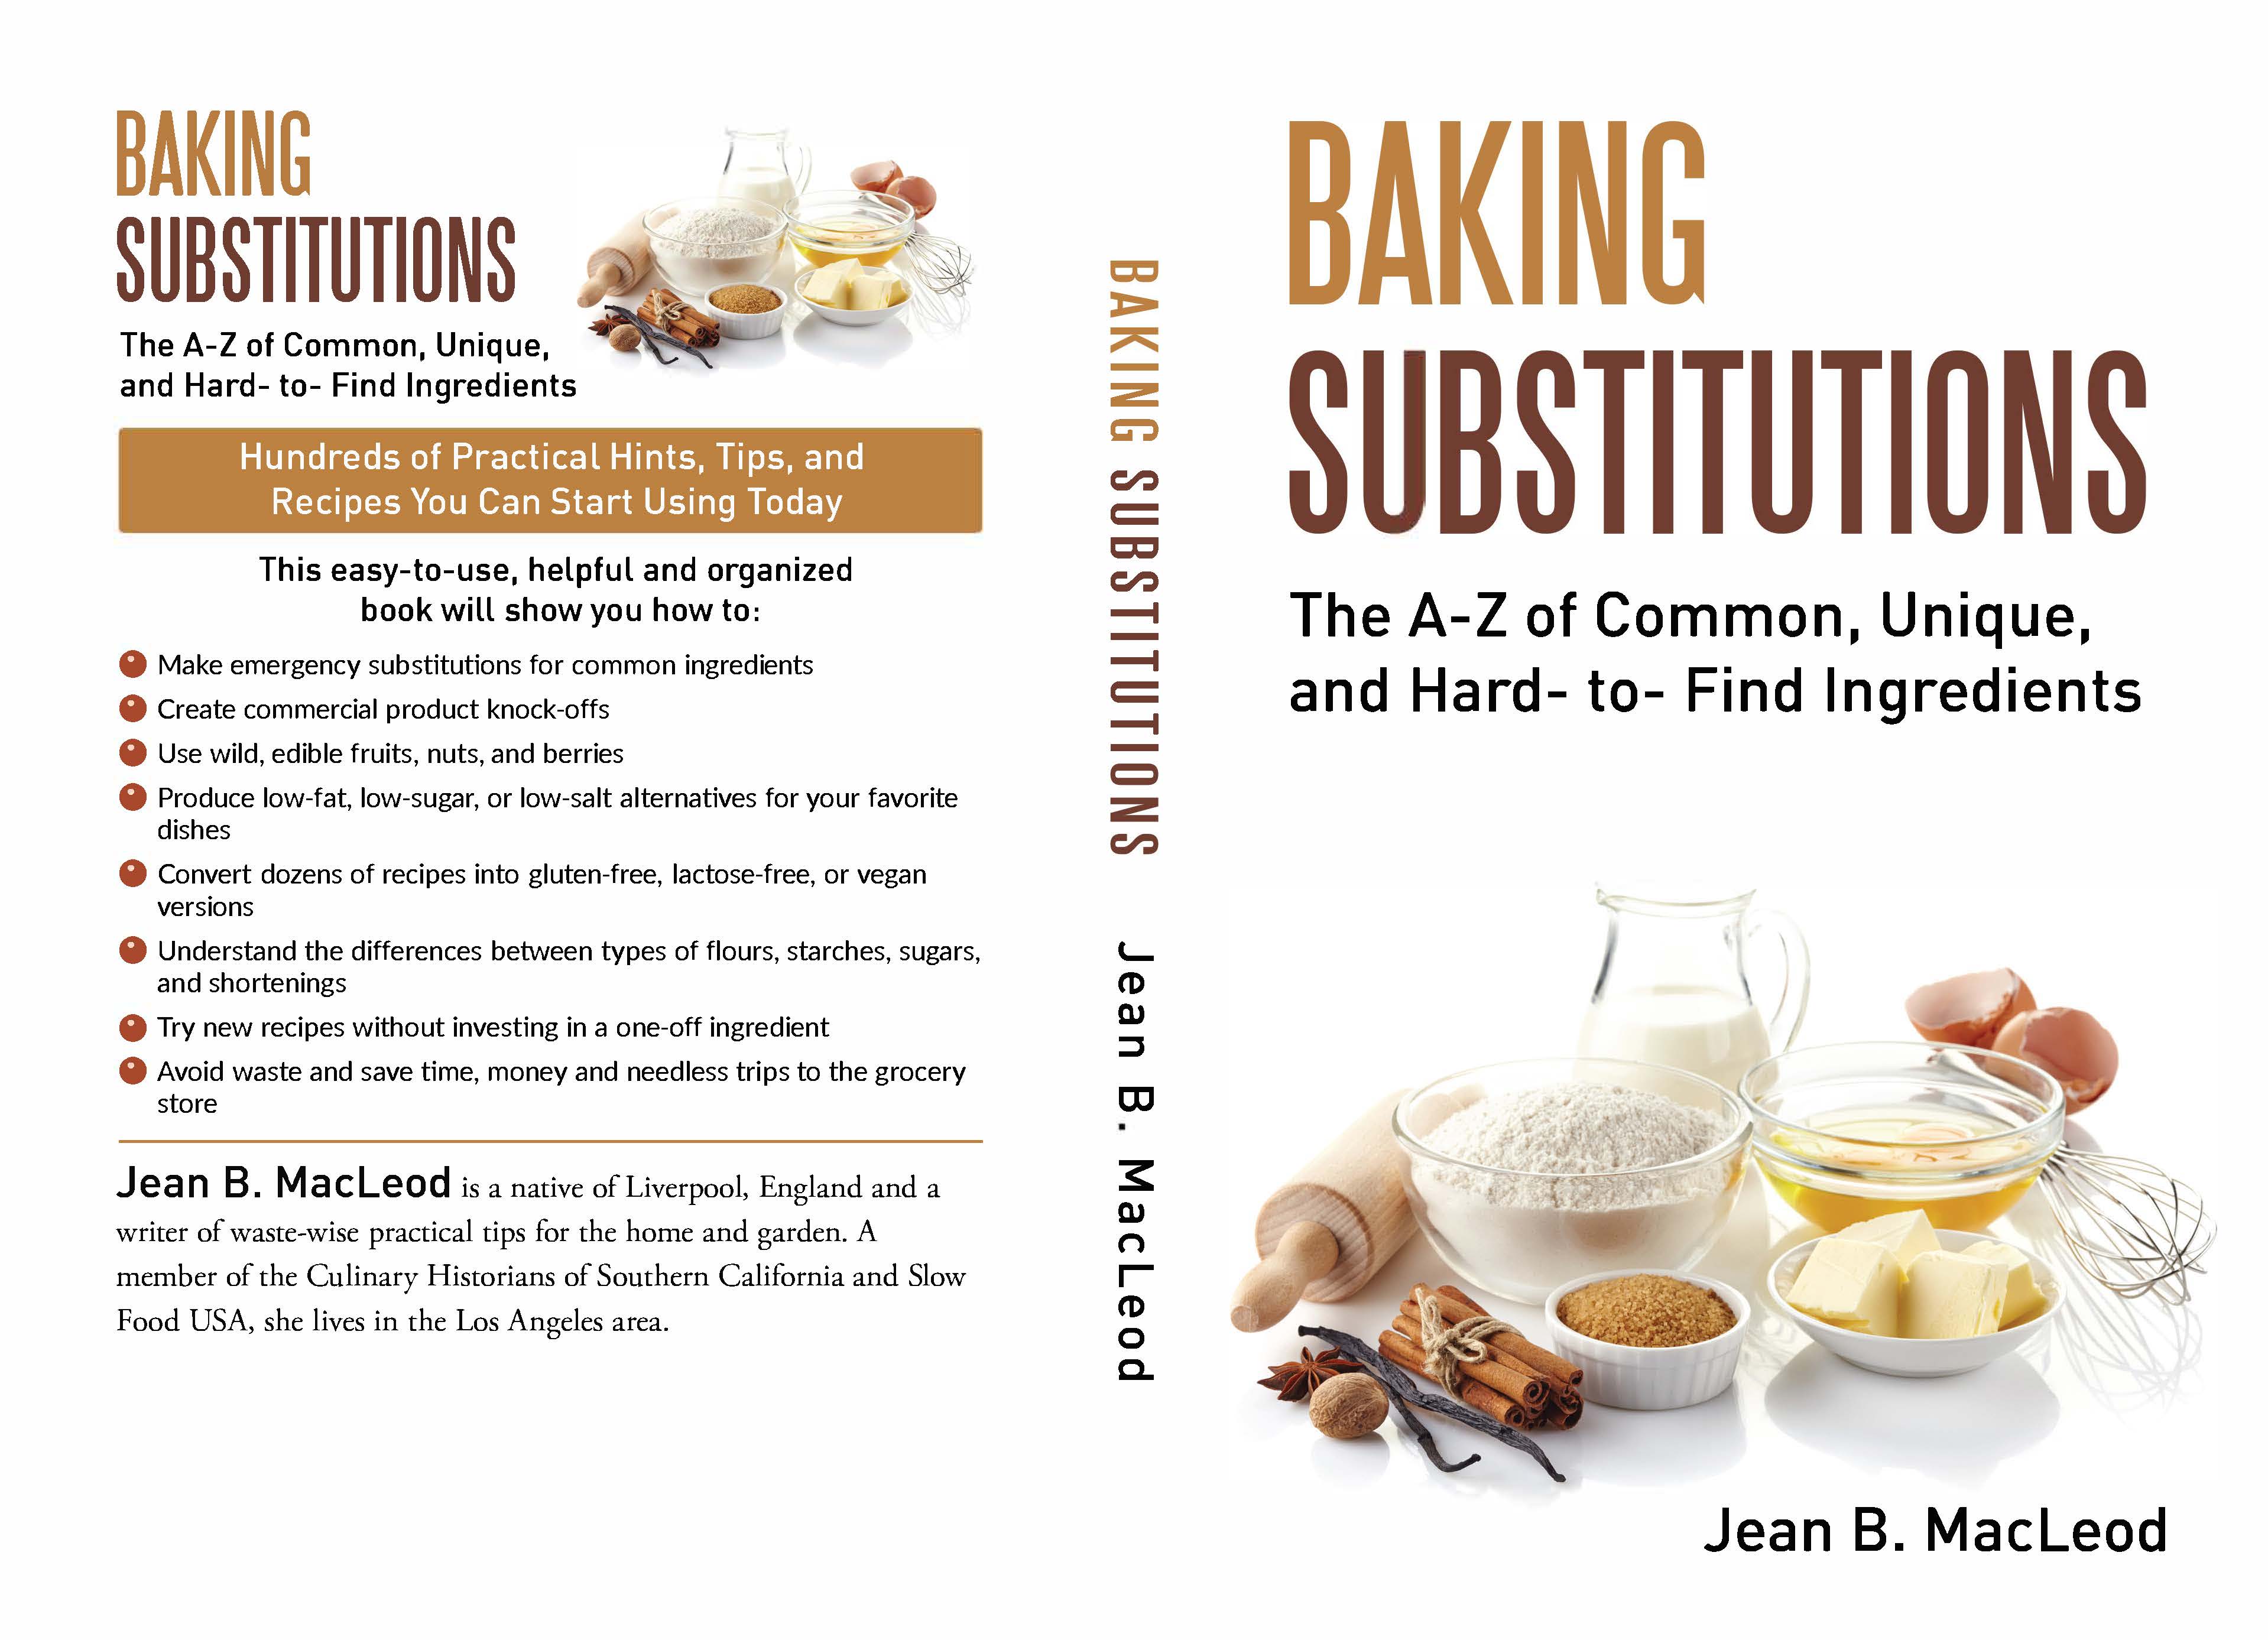 BAKING SUBSTITUTIONS: The A-Z of Common, Unique, and Hard- to- Find Ingredients